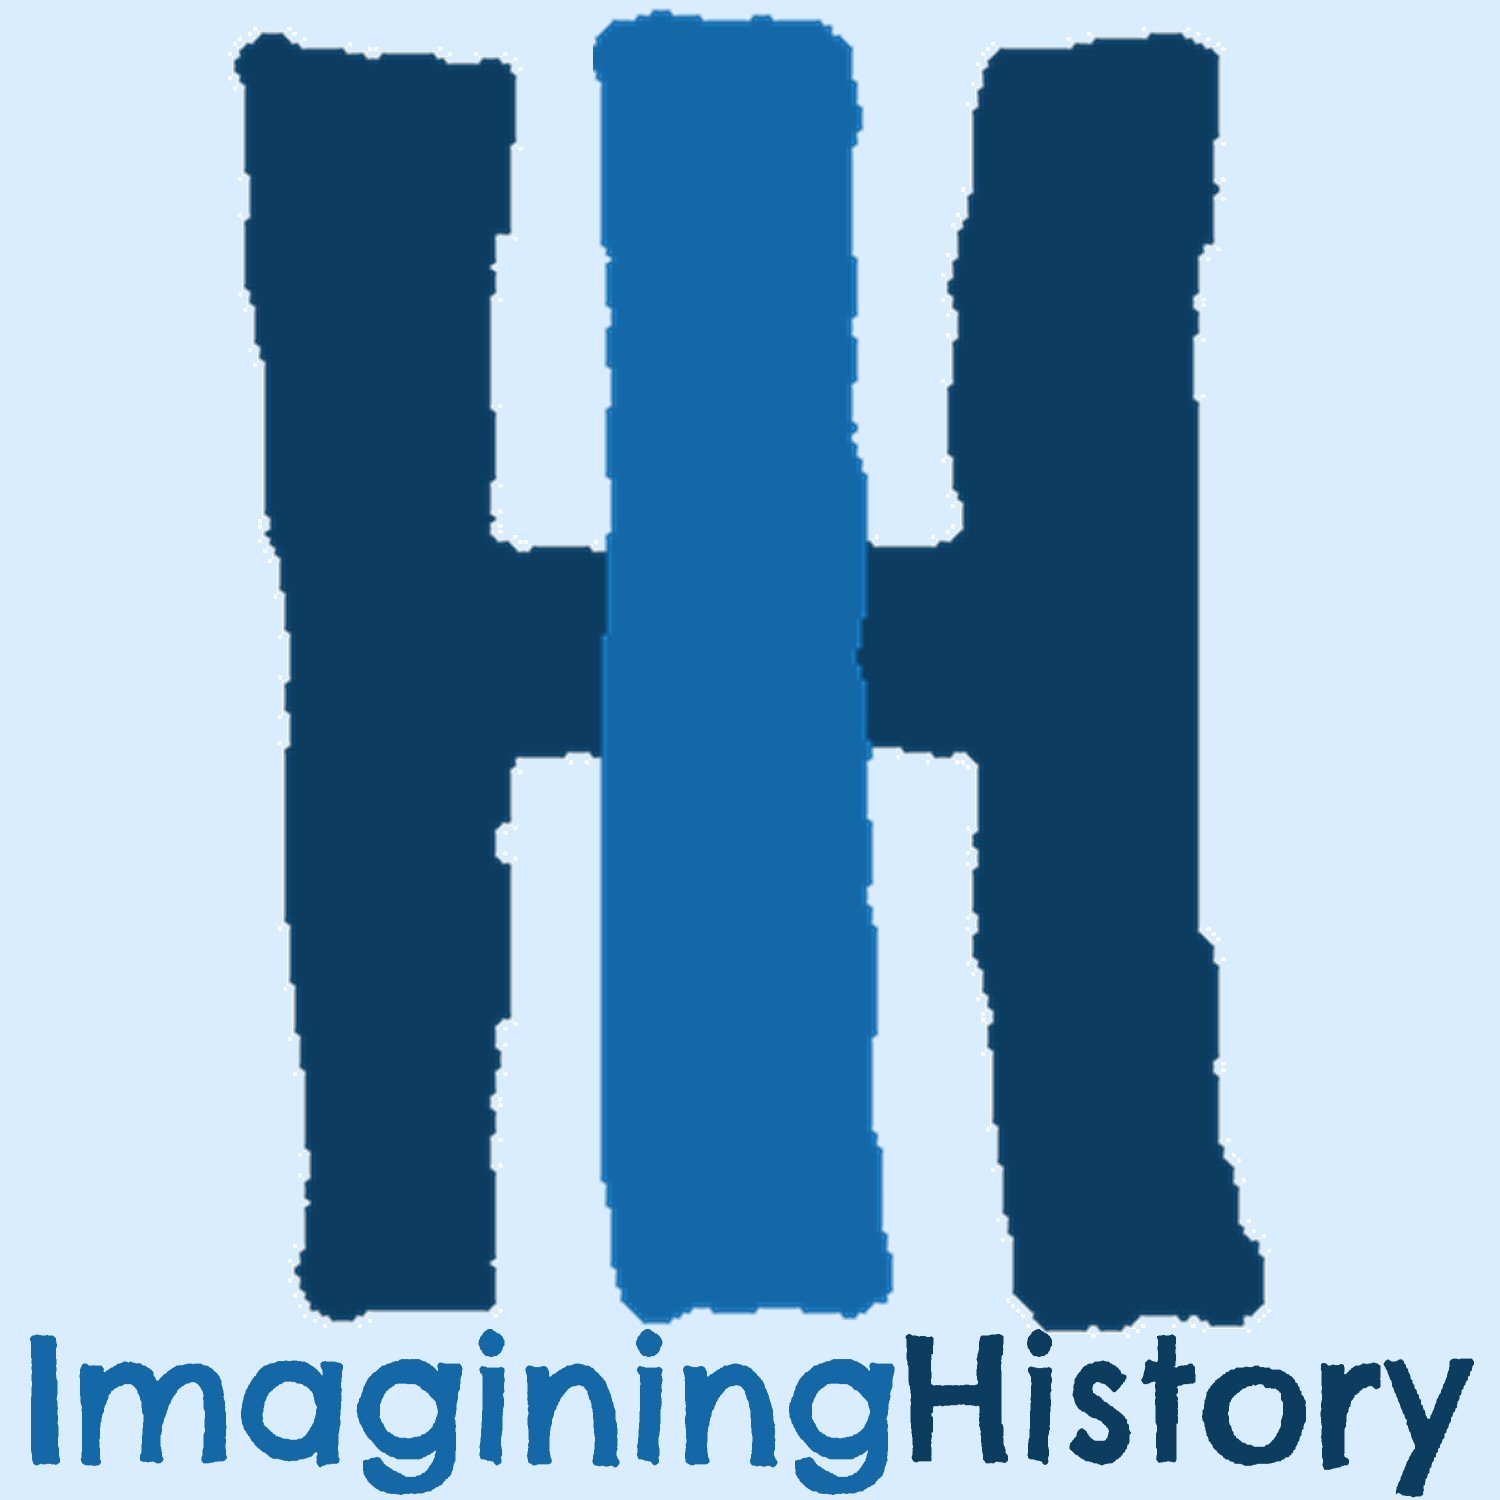 Sharing our history resources for KS1 & KS2. 
Imagining History offers award-winning drama-history workshops for schools, combining performance & imagination